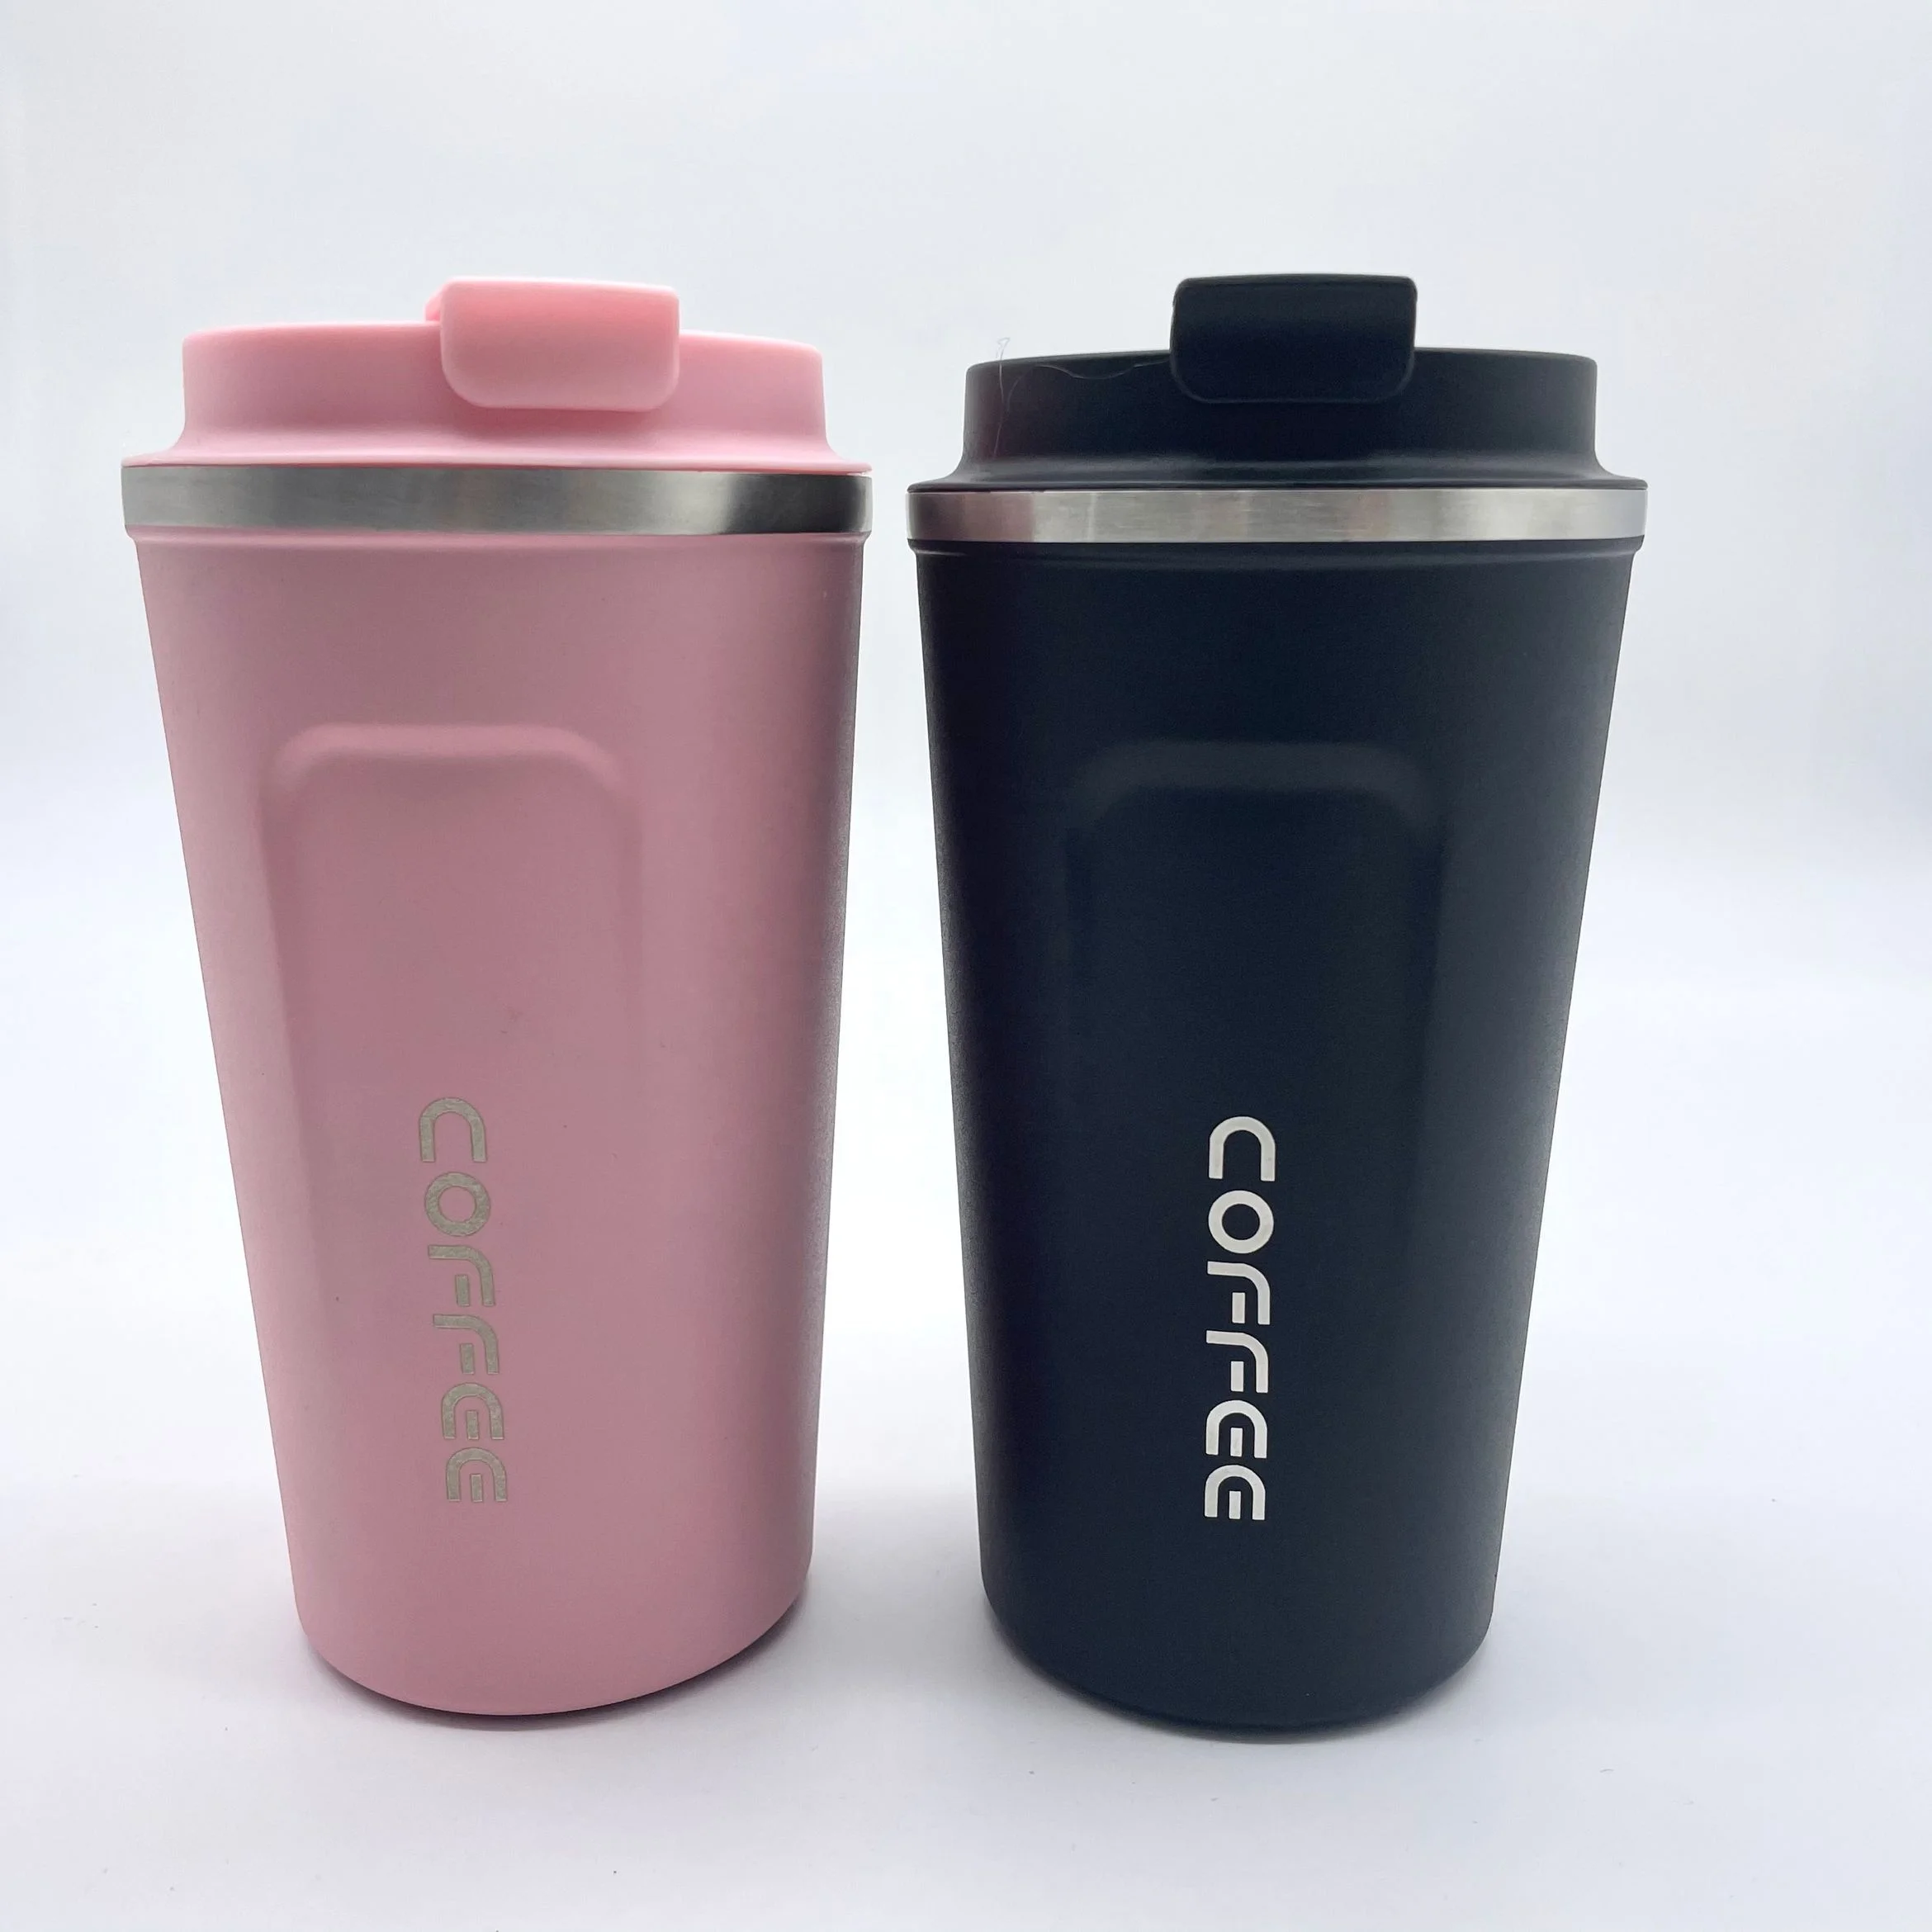 

380ml 510ml Eco-friendly Double Walled Stainless Steel Travel Coffee Mug Vacuum Insulated Reusable Coffee Tumbler Cup